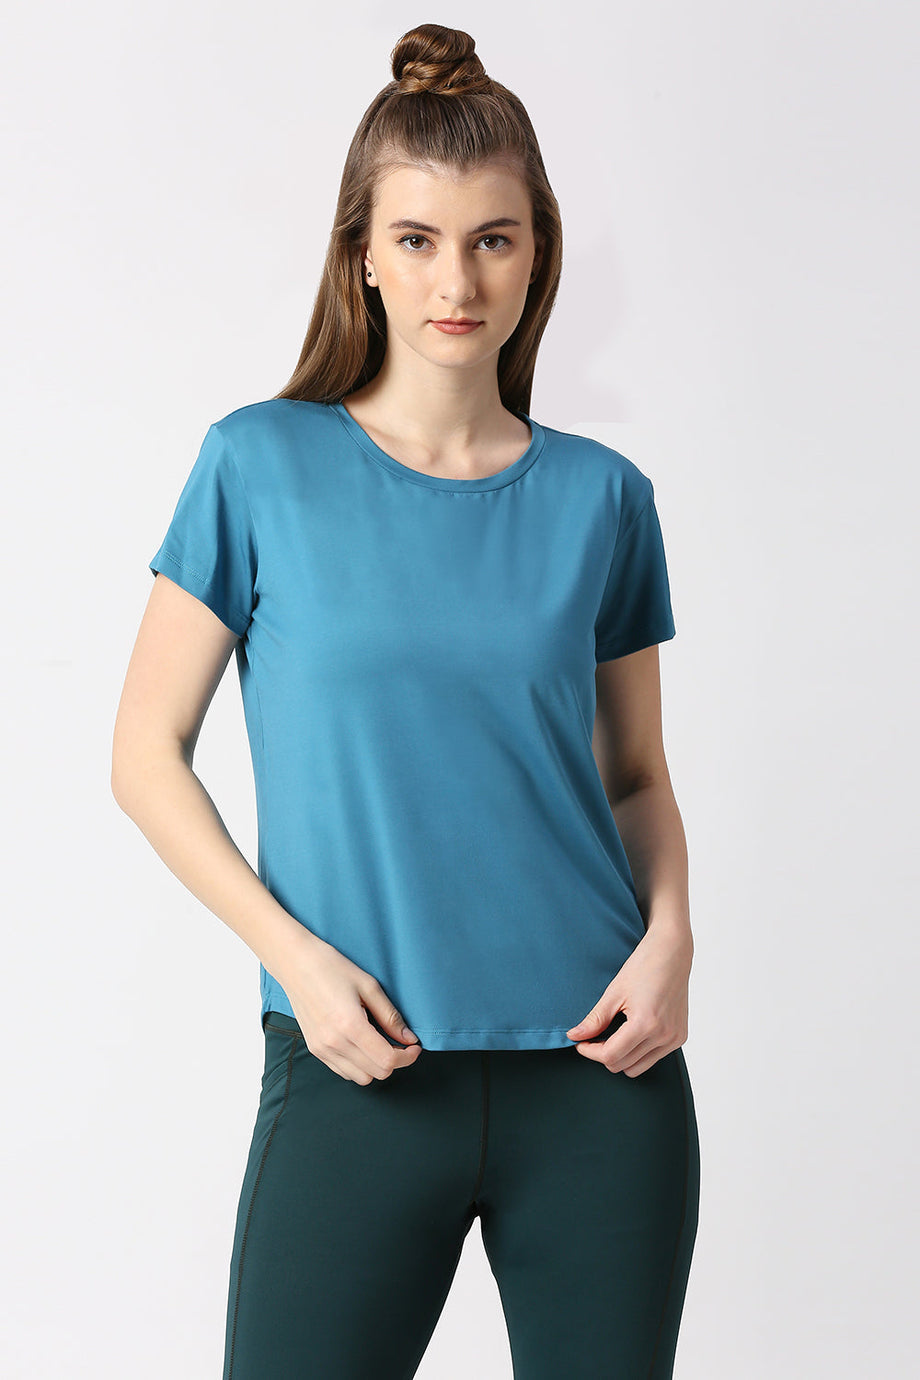 Buy long blouses for women to wear with leggings Online in INDIA